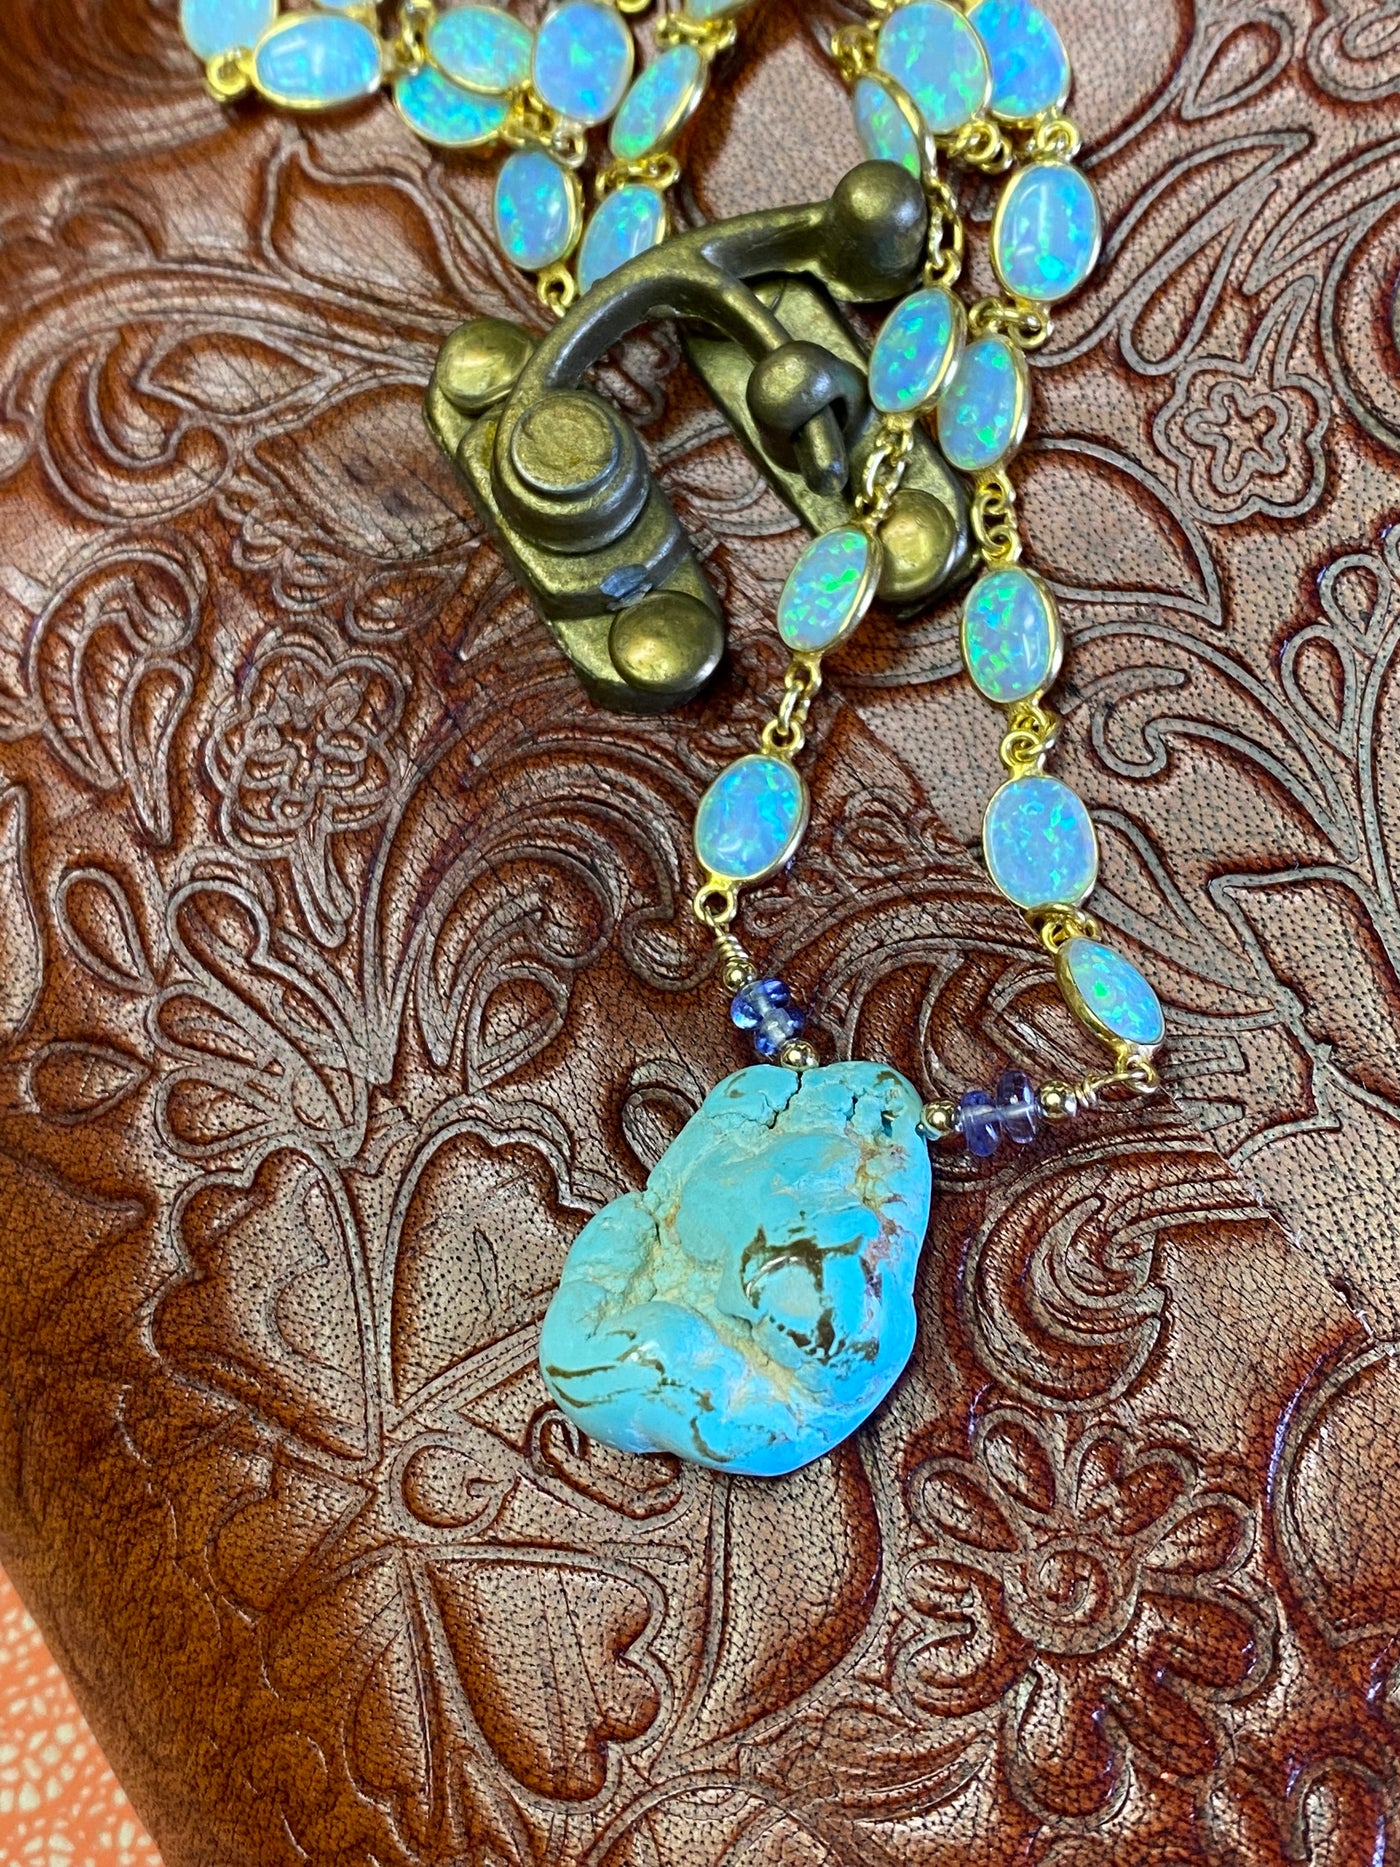 Golden Hill Turquoise Opal and Tanzanite Necklace